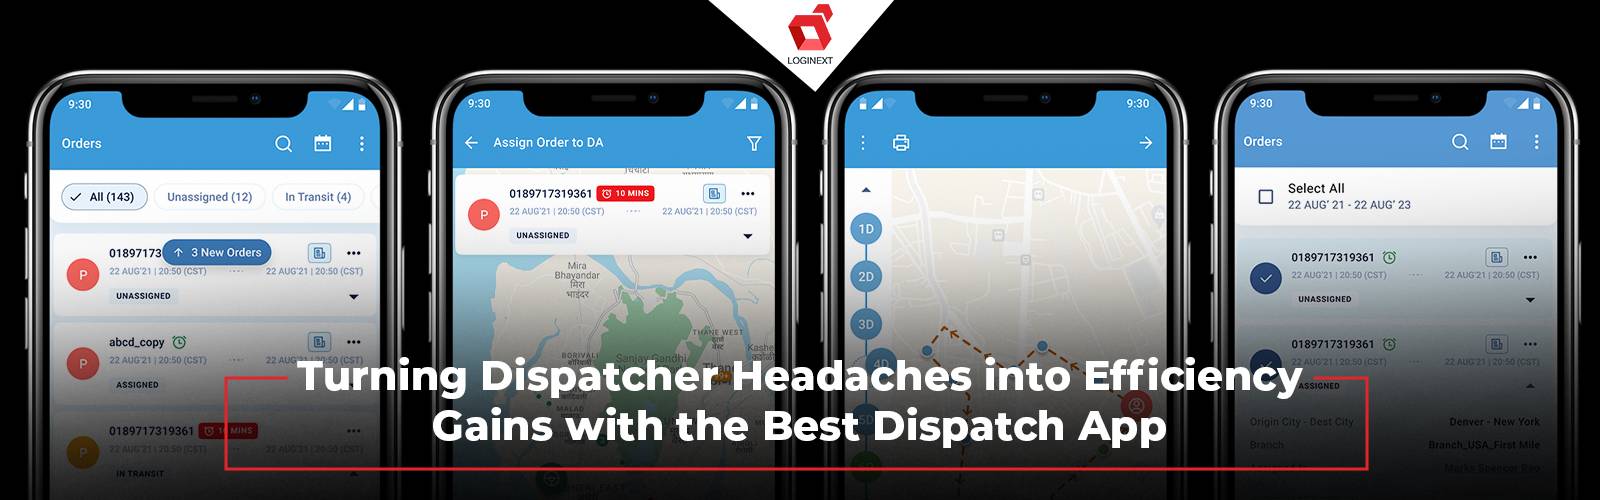 Turning dispatcher headaches into efficiency gains with the best dispatch app